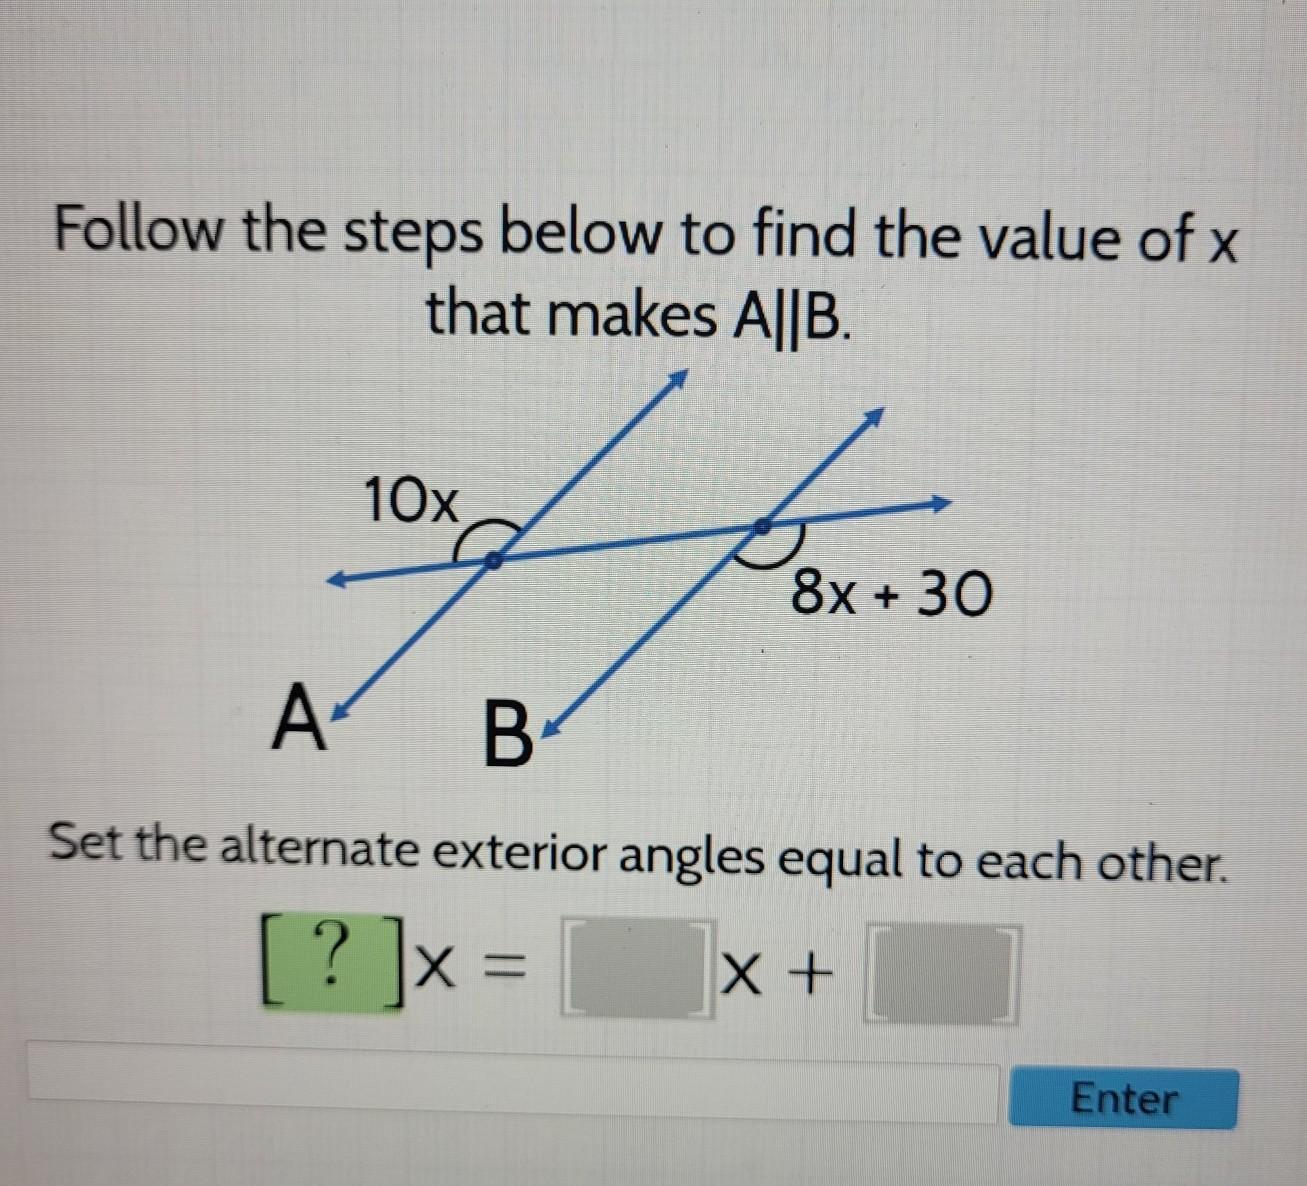 Follow The Steps Below To Find The Value Of X That Makes A||B. Offende 8x + 30 B 10x A Set The Alternate